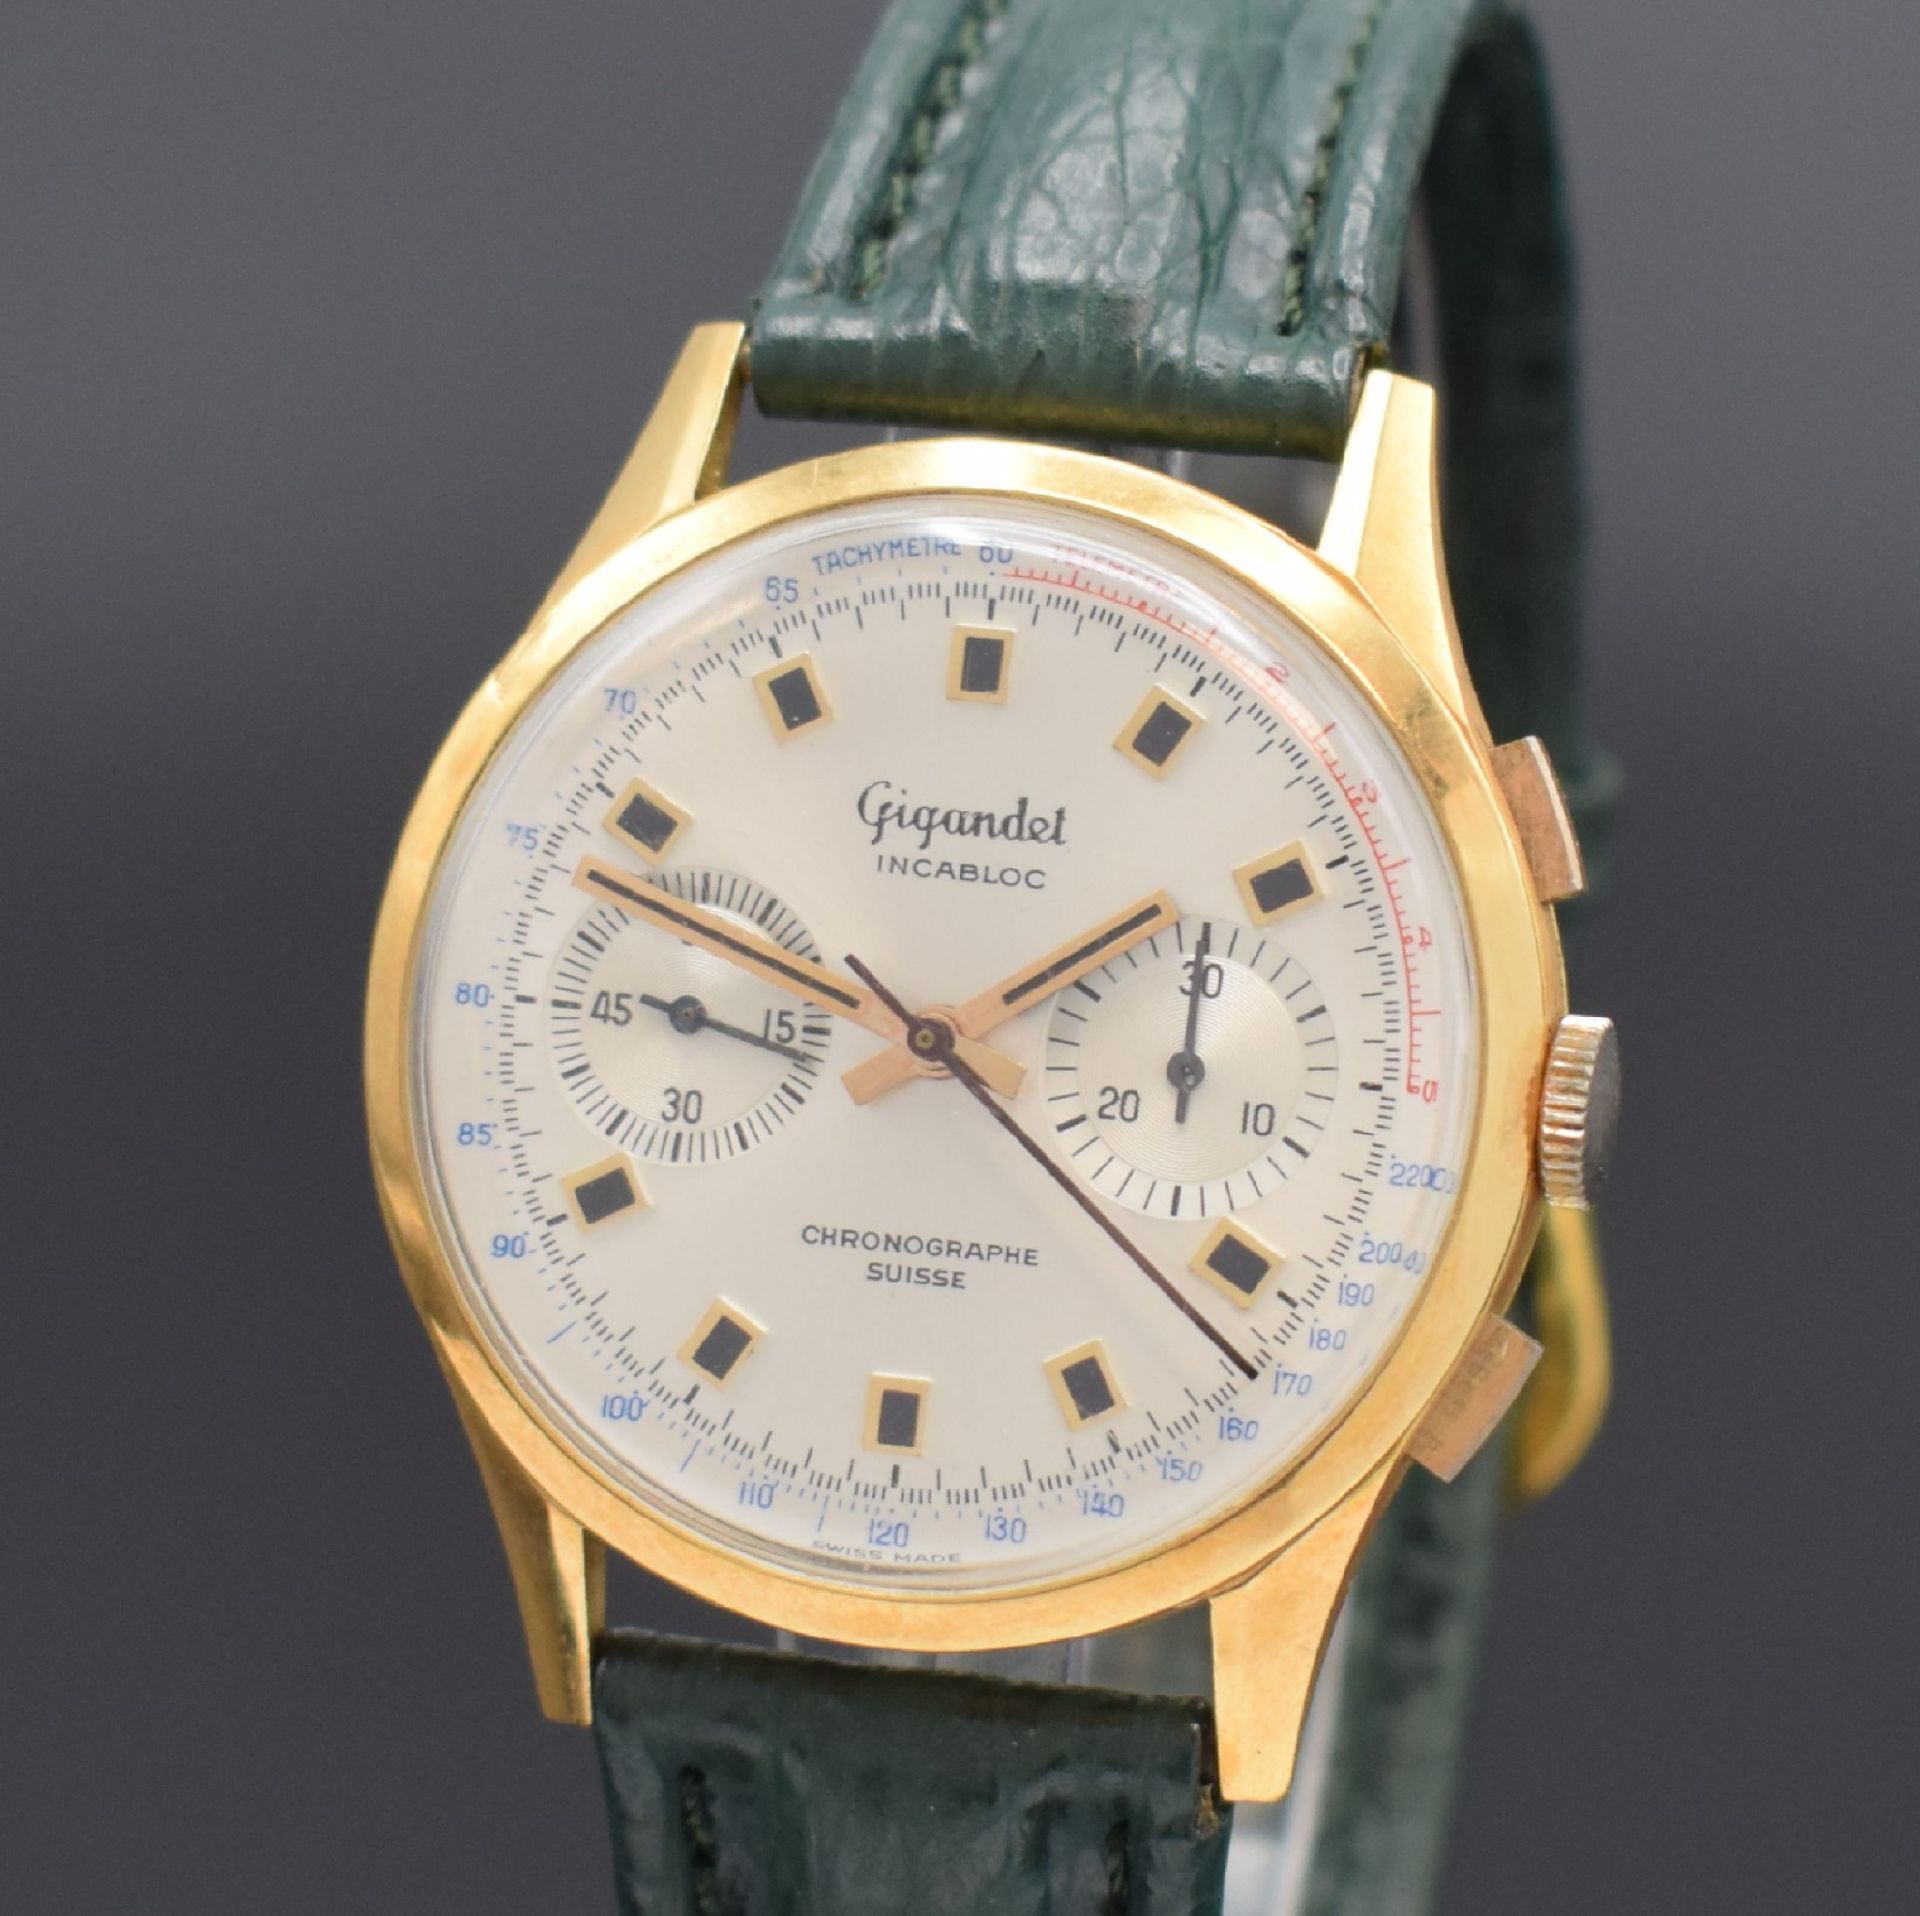 GIGANDET / CHRONOGRAPHE SUISSE Armbandchronograph in RG - Image 2 of 6